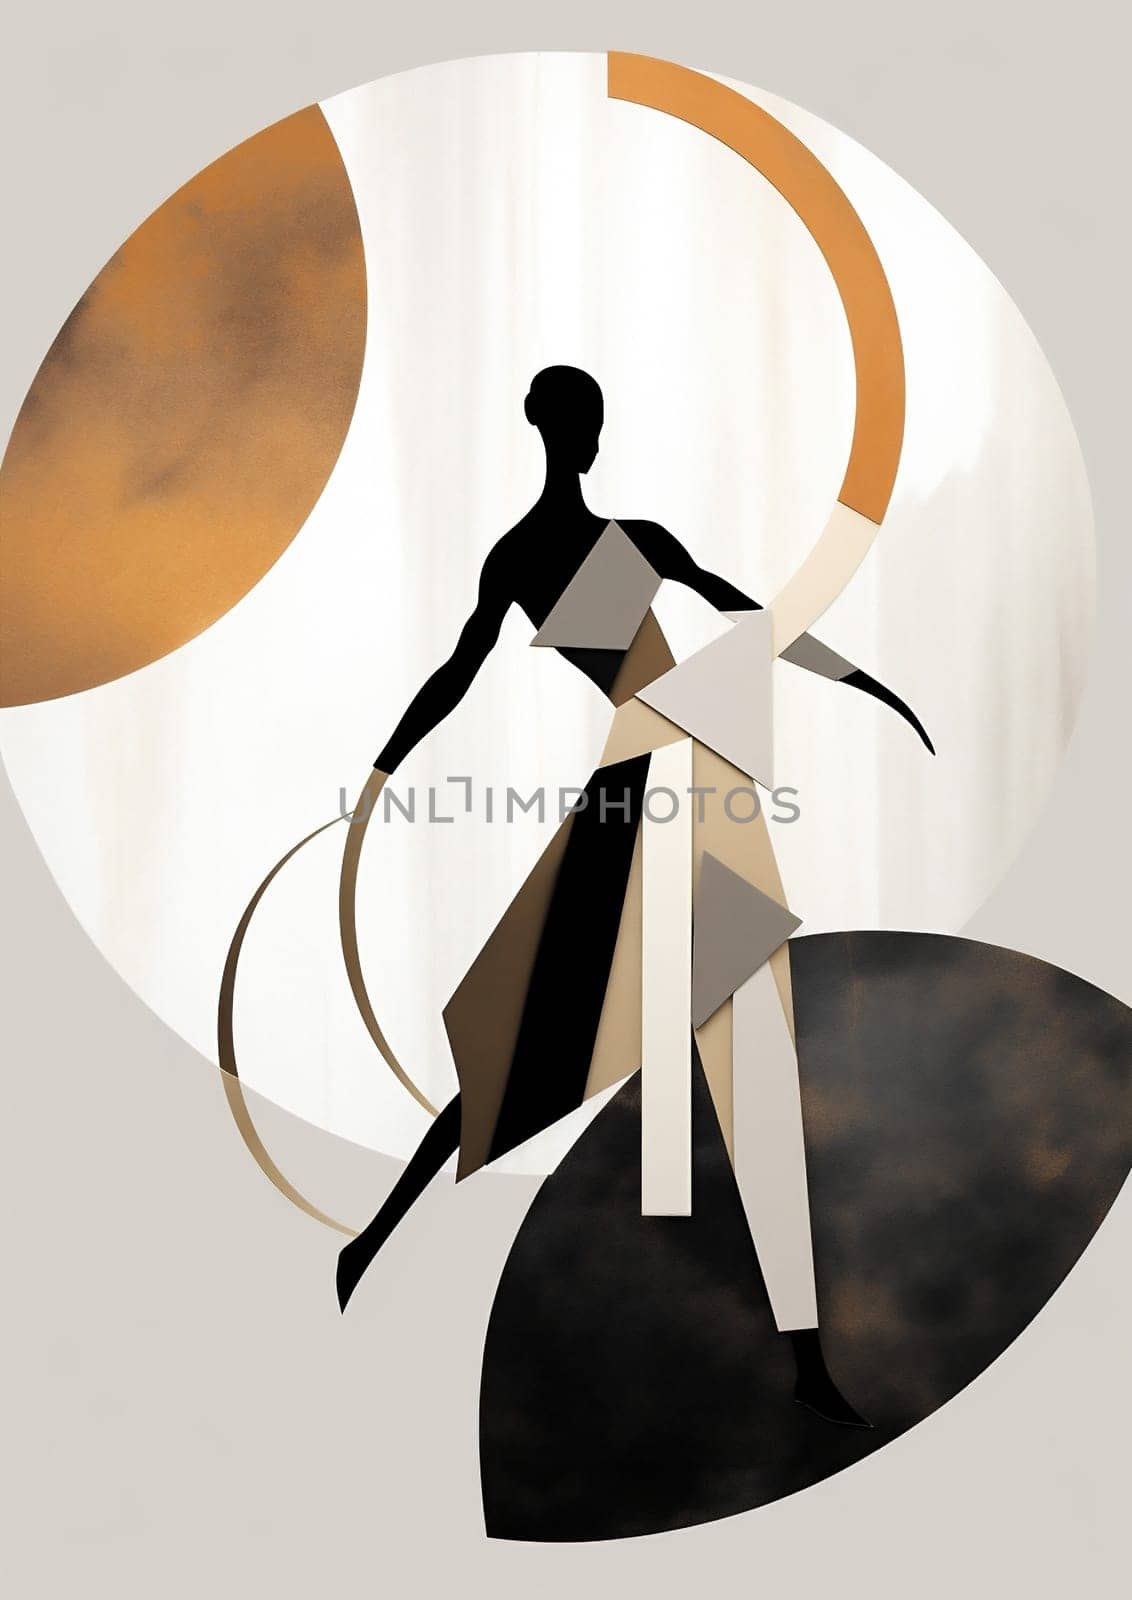 Black elegance background young style beauty red body abstract lady fashion modern model art women silhouette dress person design illustration female hair